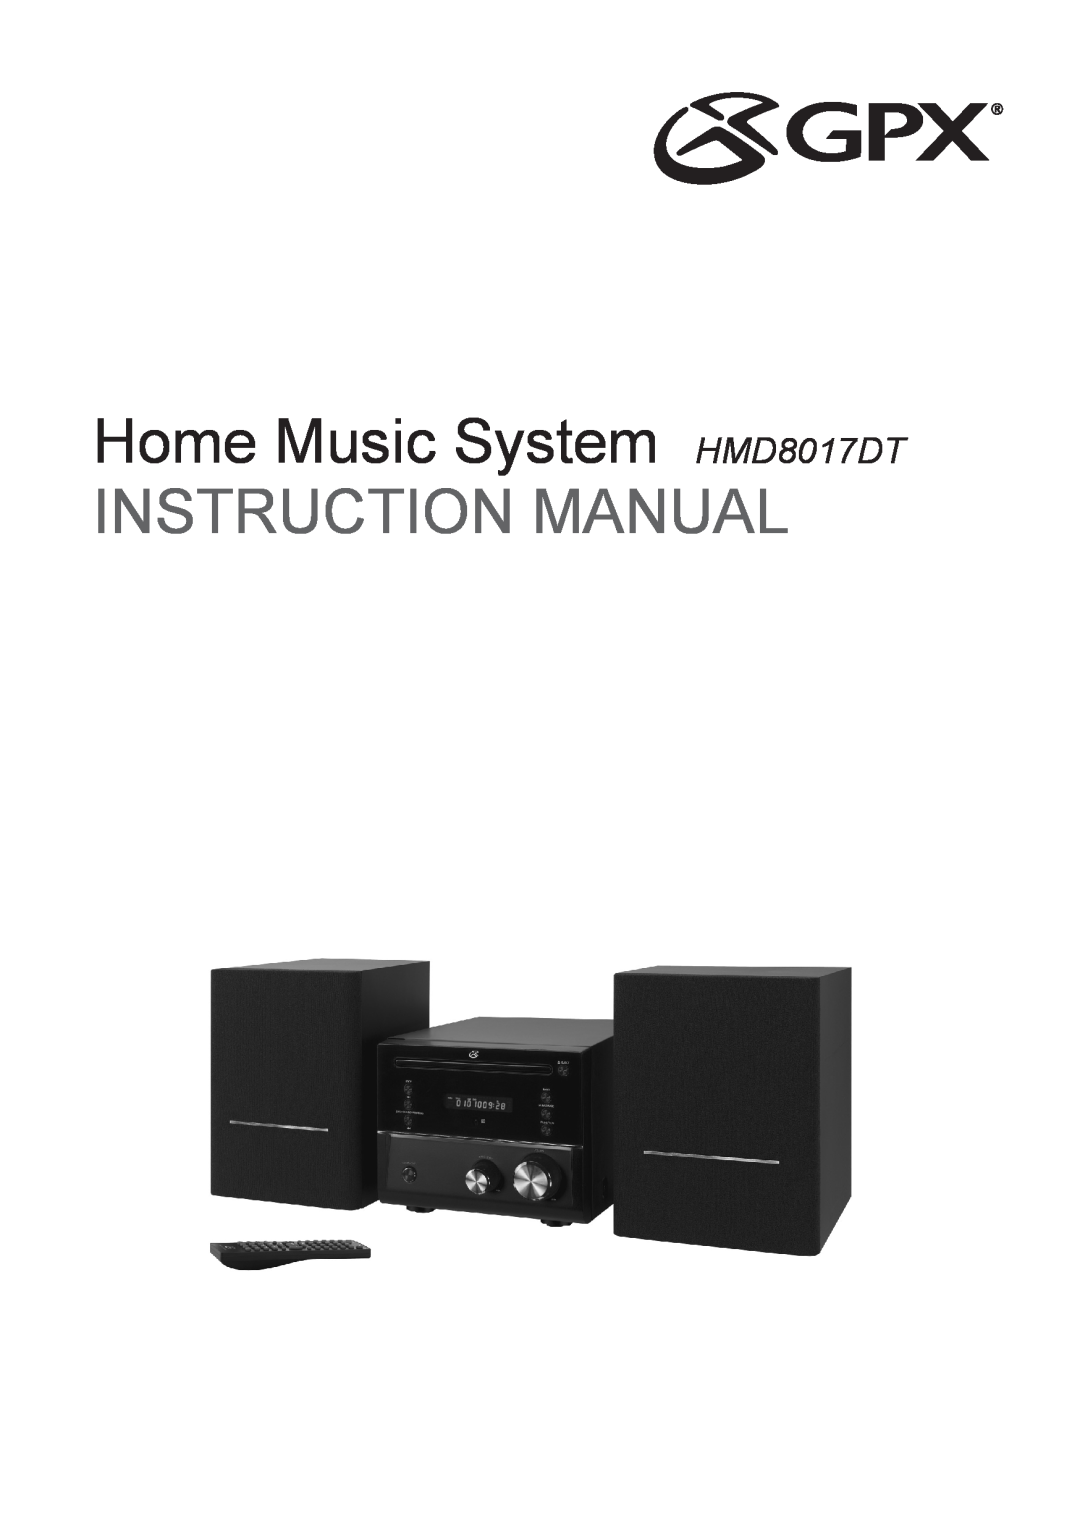 GPX instruction manual Home Music System HMD8017DT 